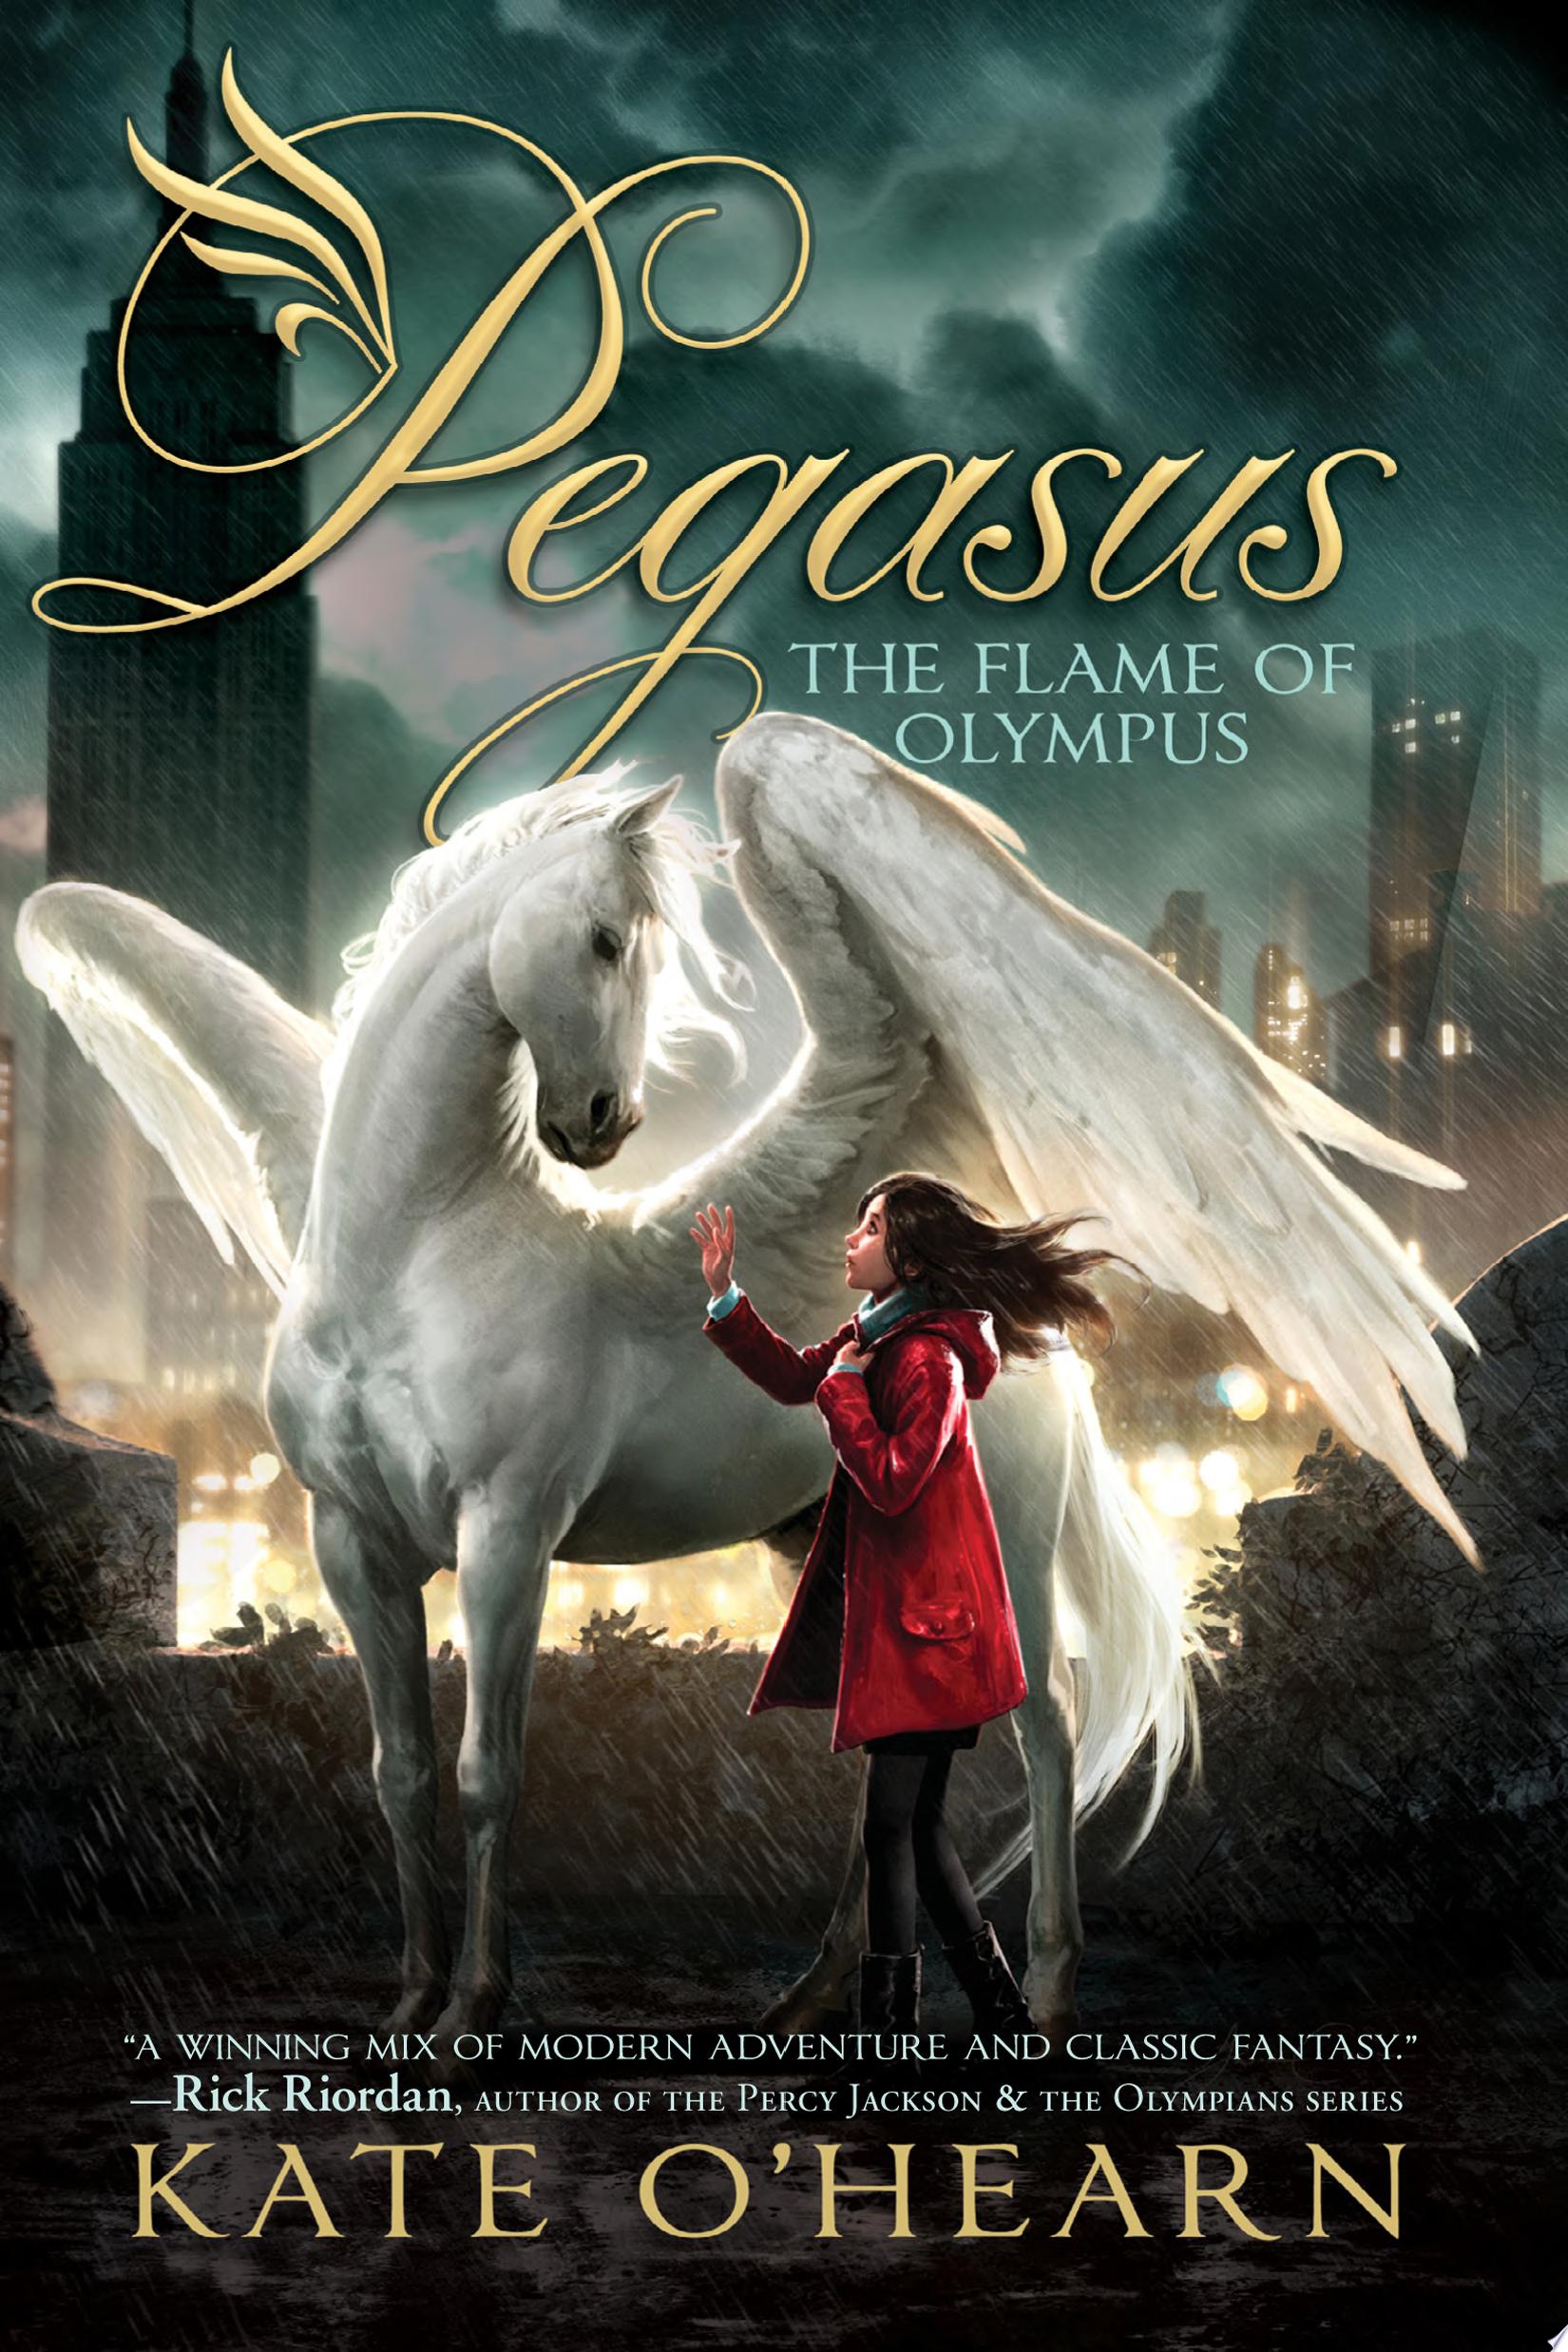 Image for "The Flame of Olympus"